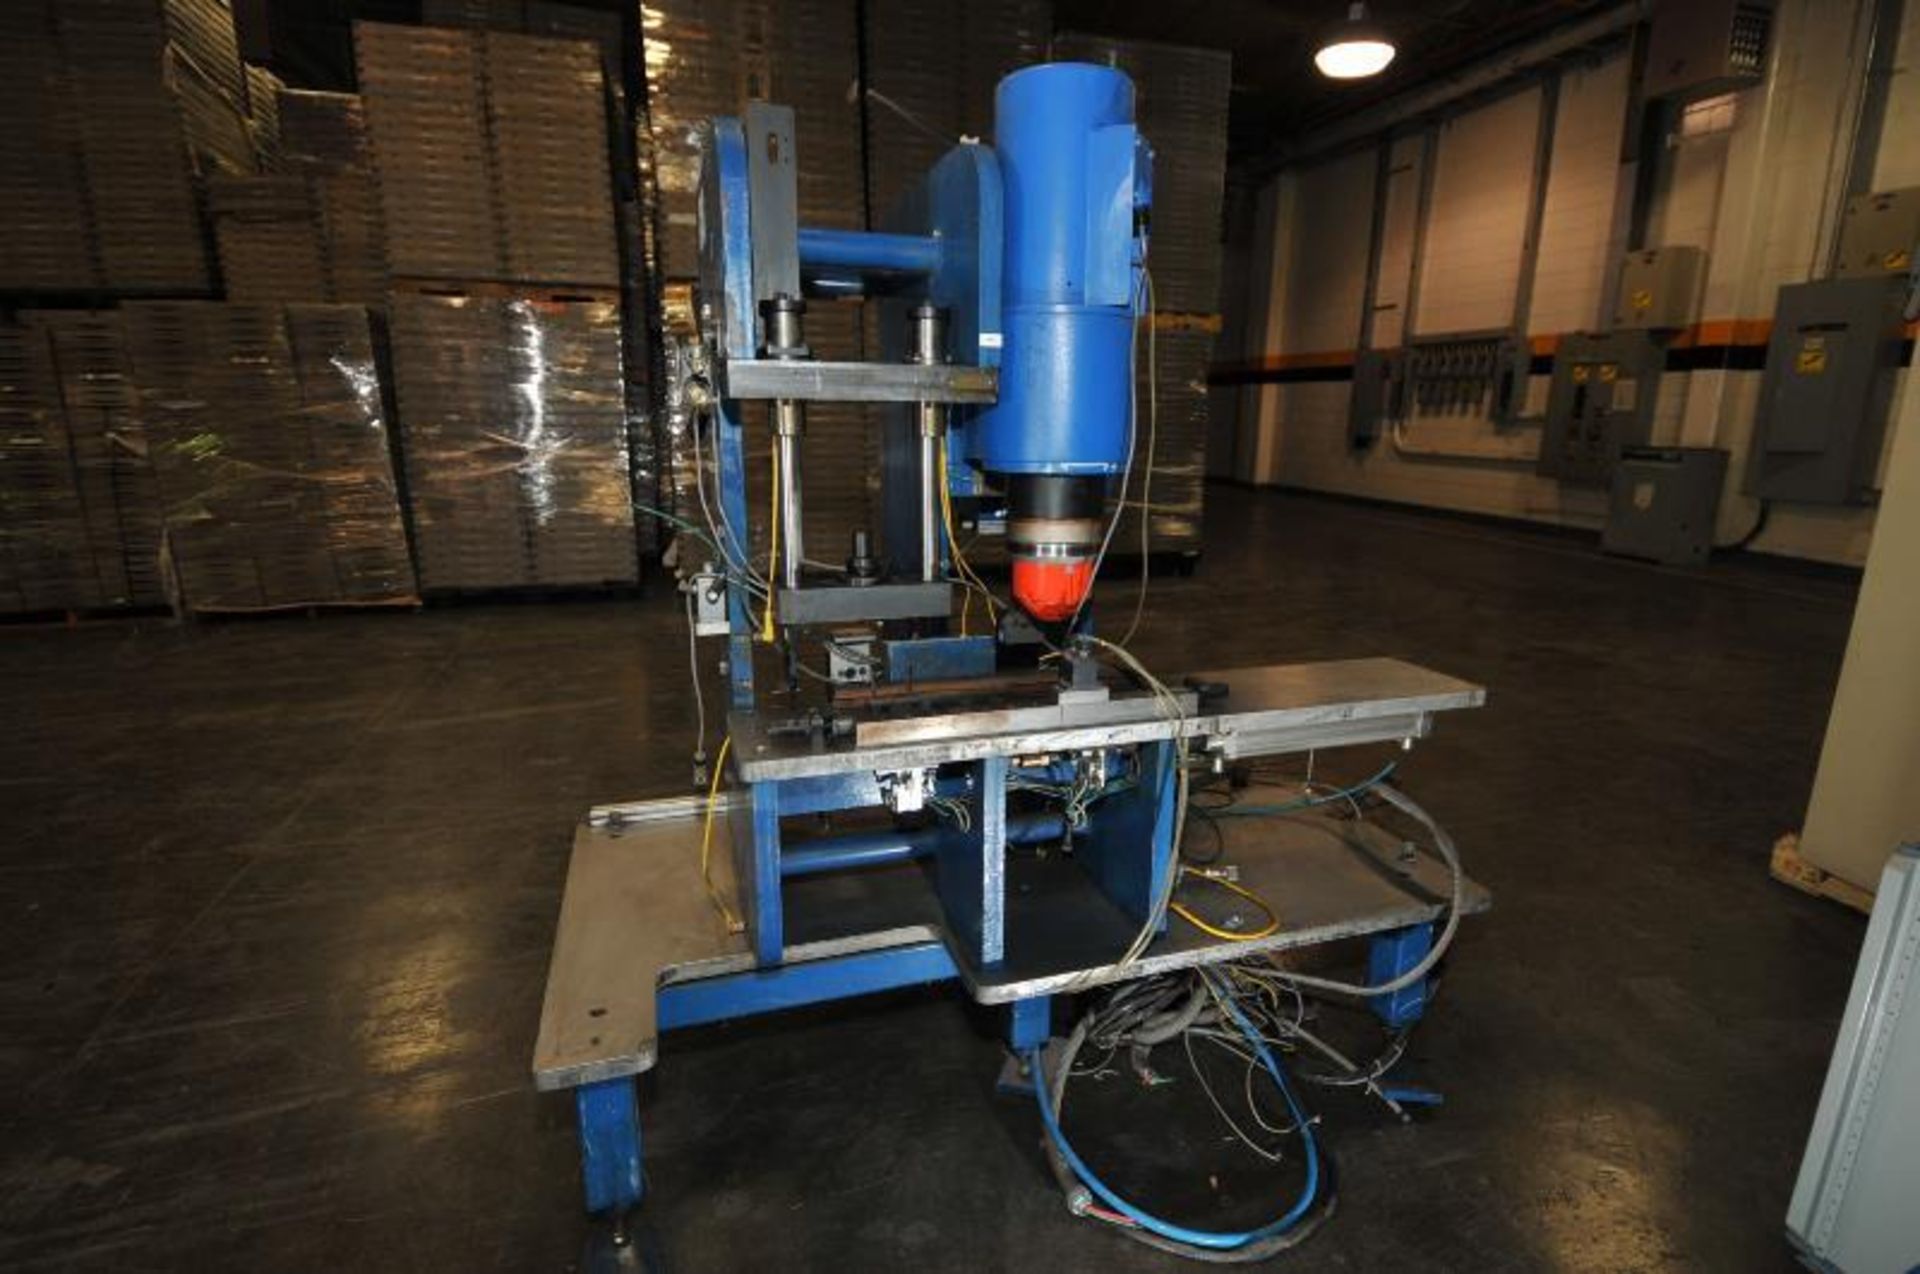 workstation for Industrial Riveter, brand: inovative automation, condition: spare parts. Location: - Image 4 of 11